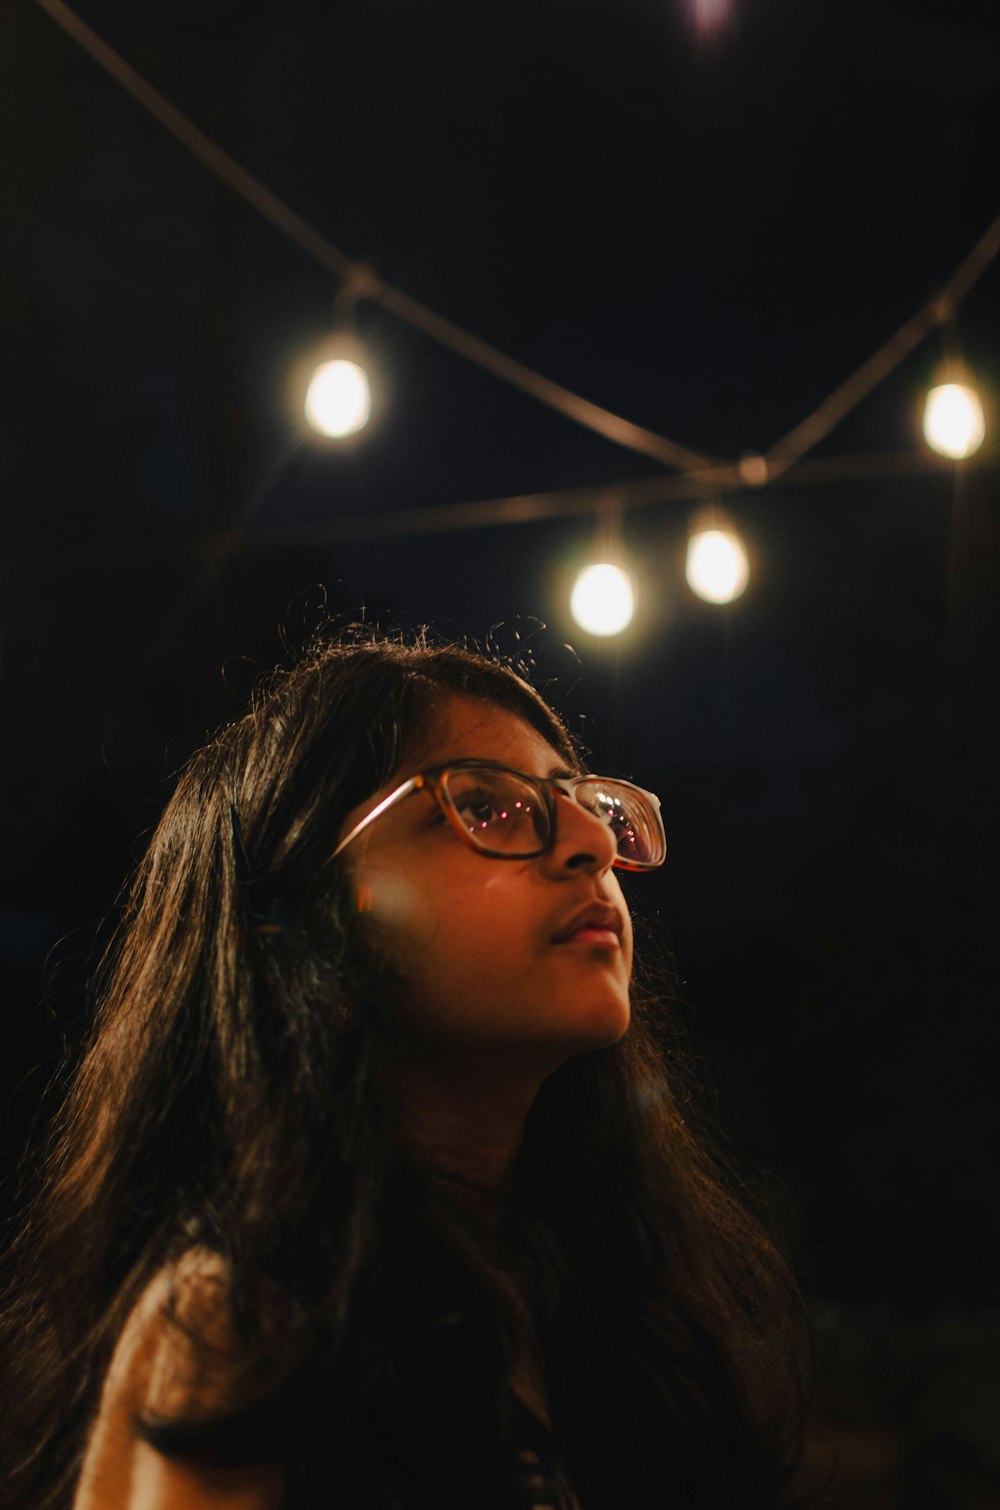 a woman wearing glasses looking up at a string of lights